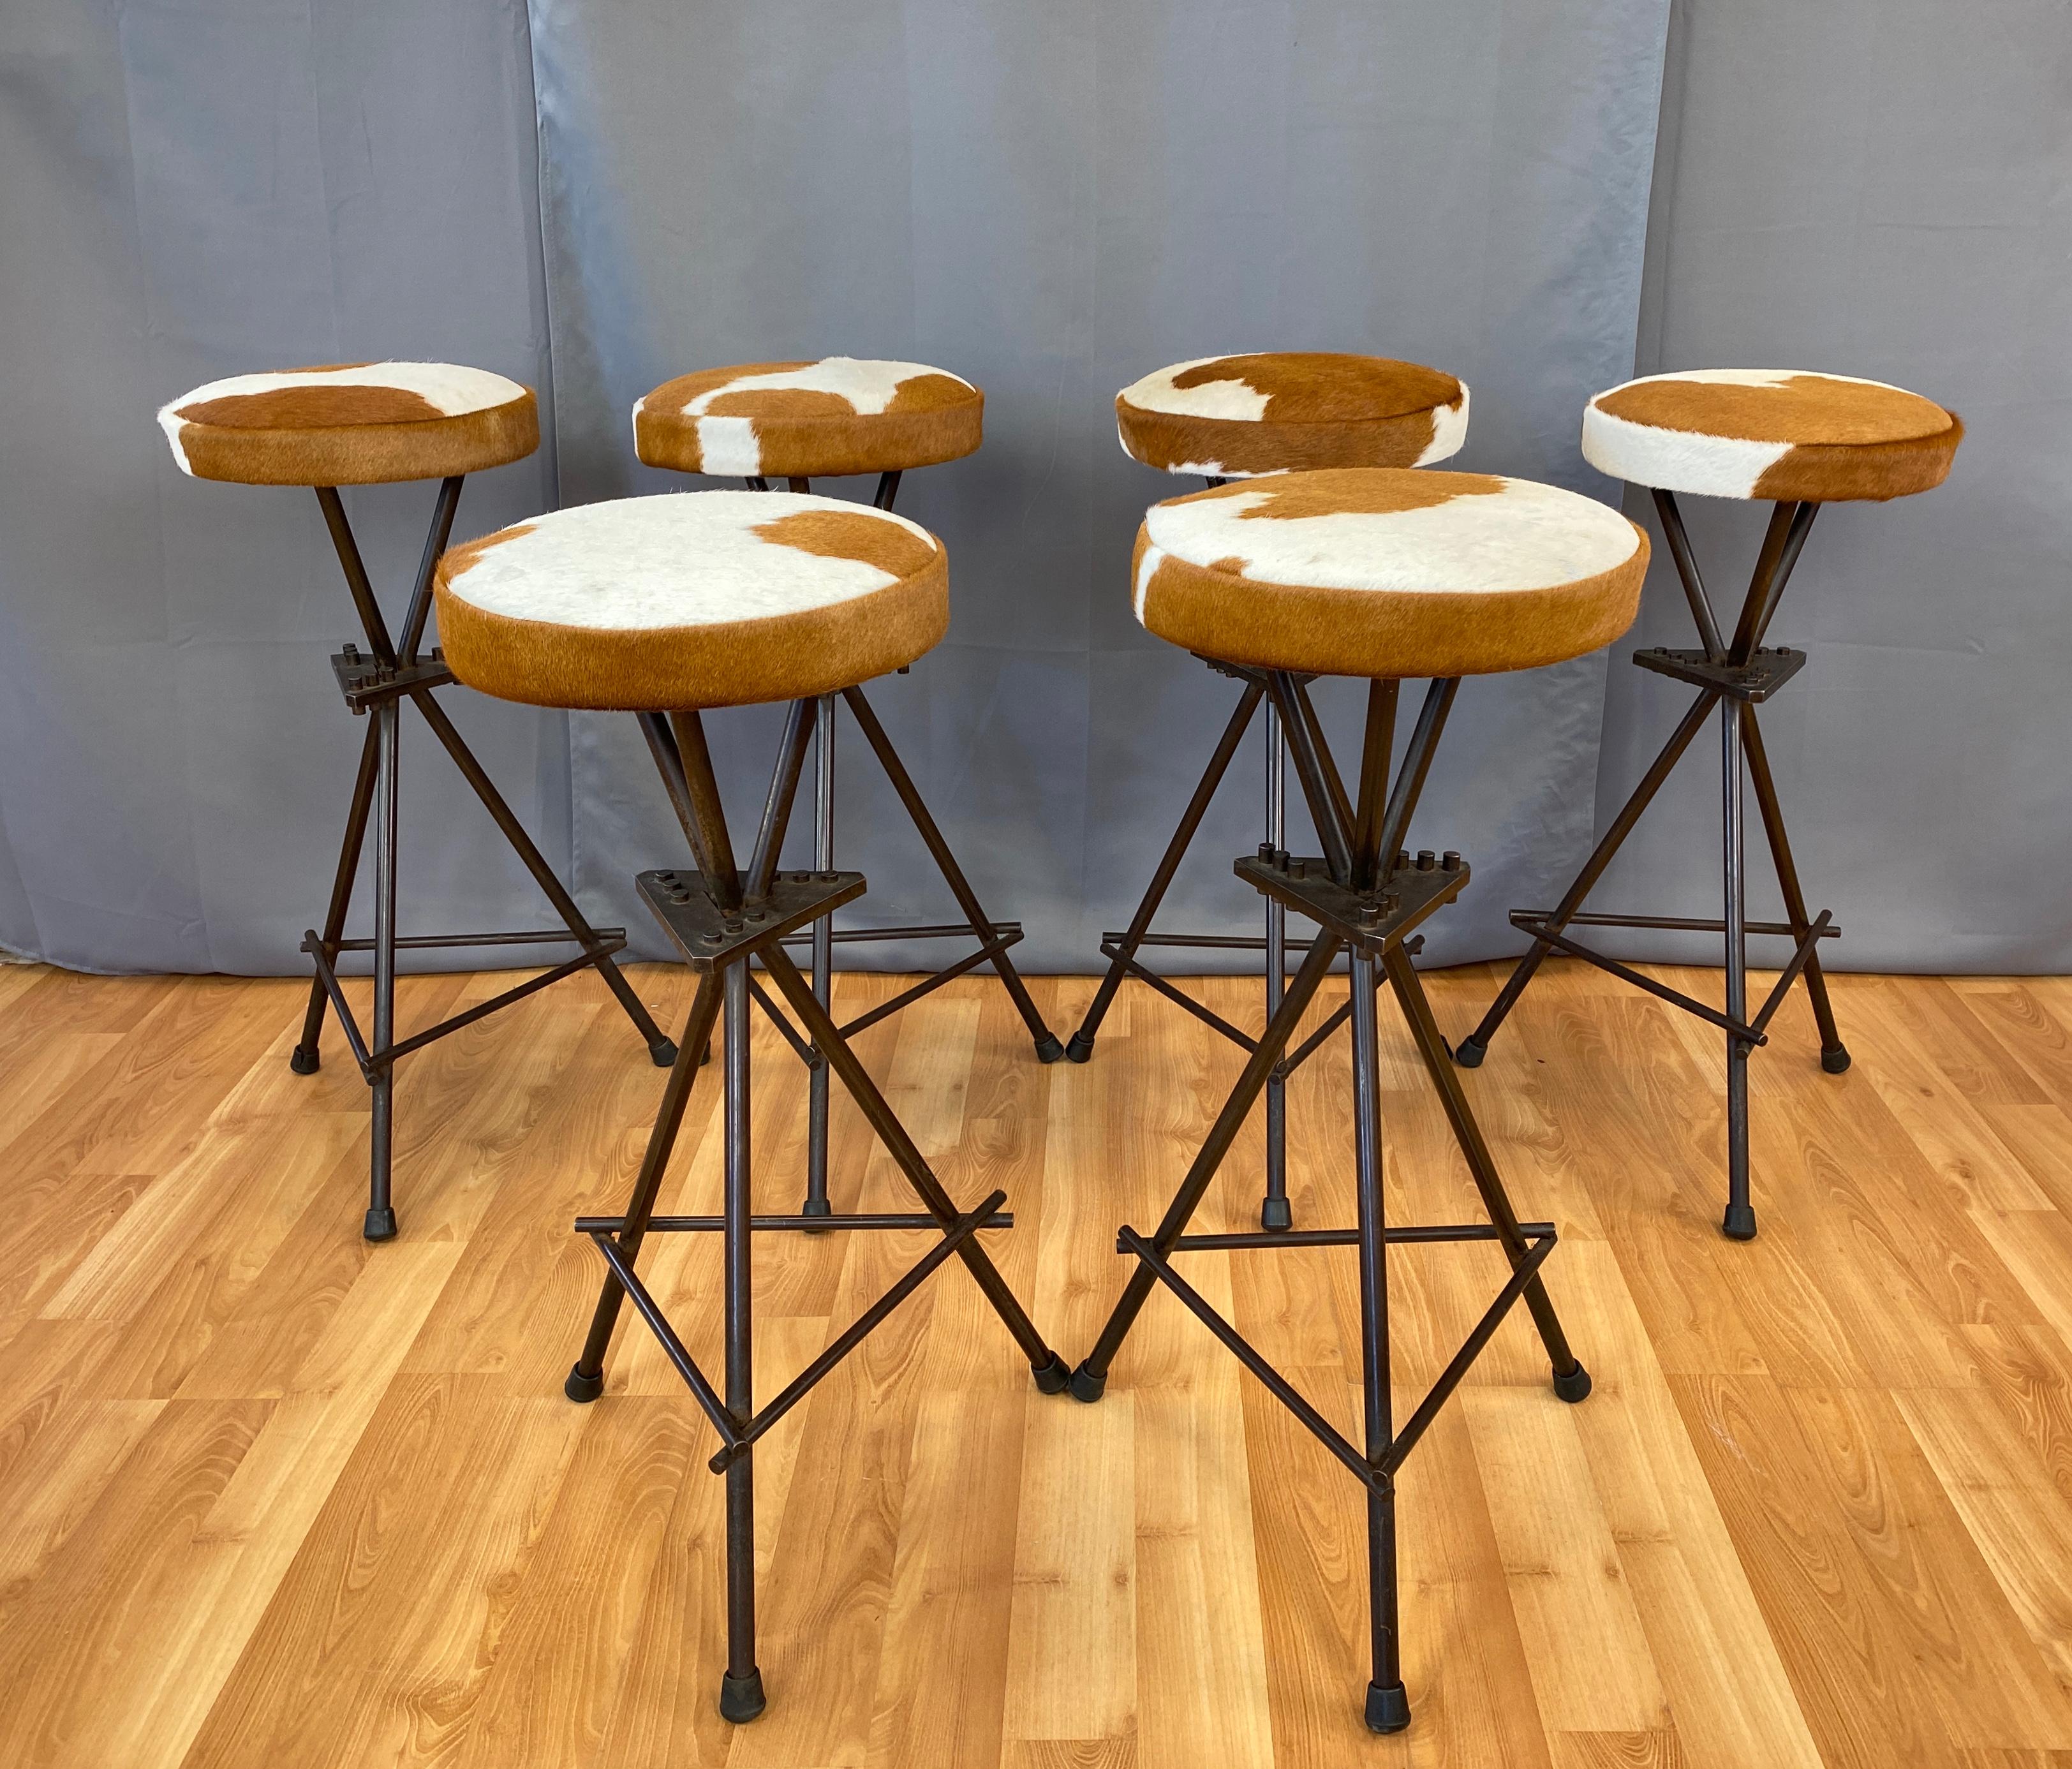 Offered here is a set of six constructivist wrought iron bar stools. 
Patinated bronze wrought iron, then oil finished. New cowhide upholstery seats (seats are non-swiveling). 
We feel these were most likely offered to the trade/custom made, and